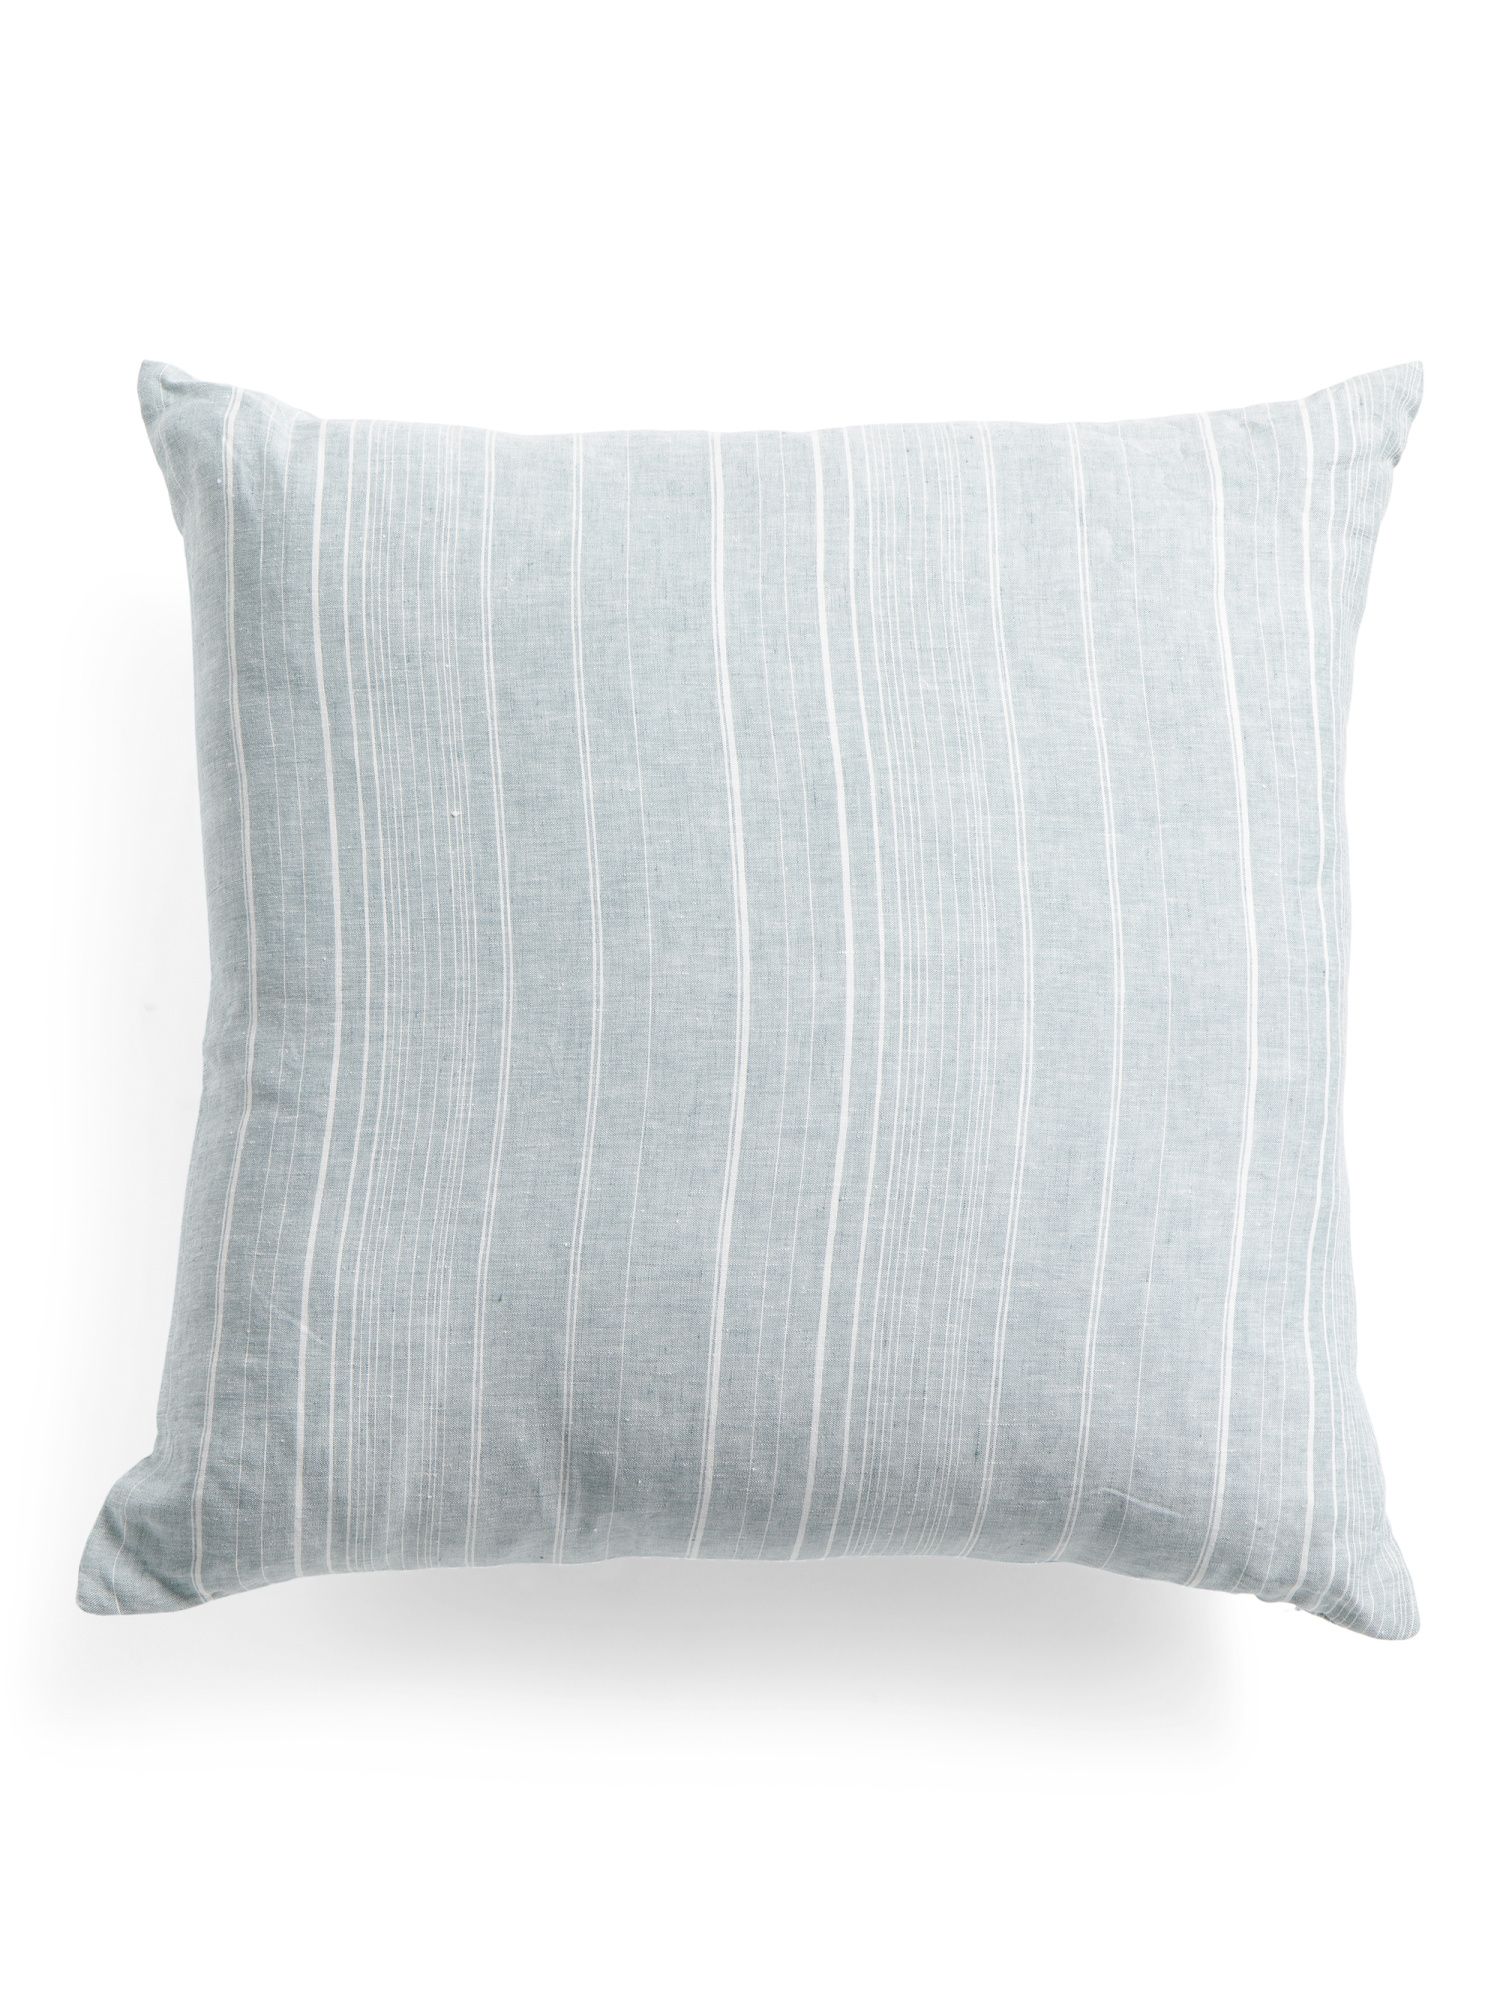 Made In Portugal Linen Striped Pillow | The Global Decor Shop | Marshalls | Marshalls